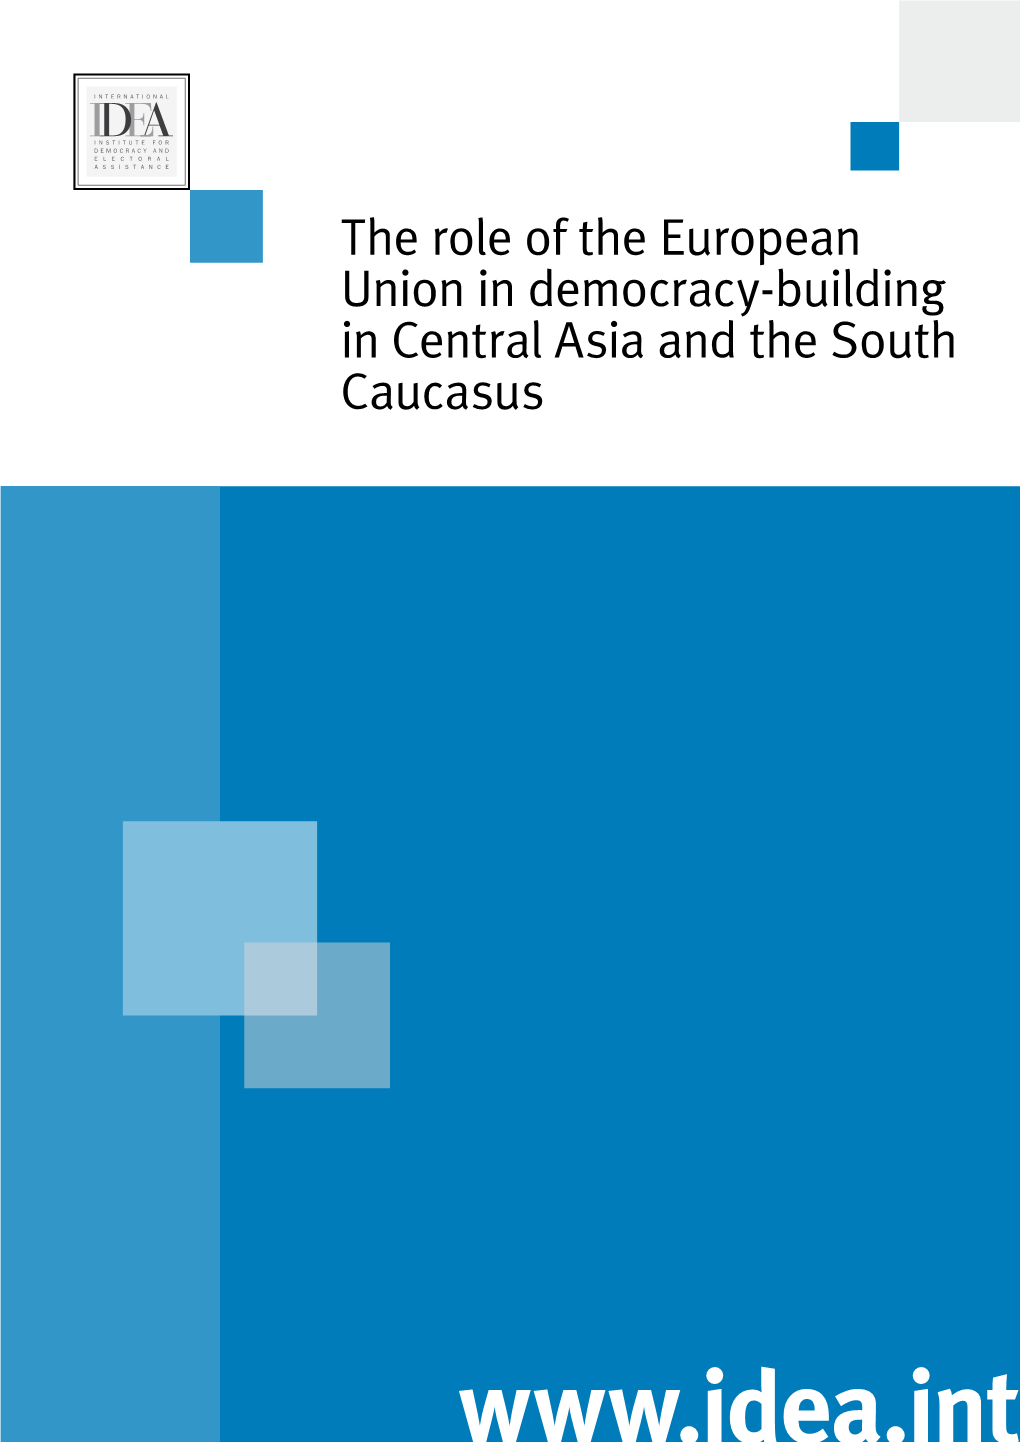 The Role of the European Union in Central Asia and the South Caucasus